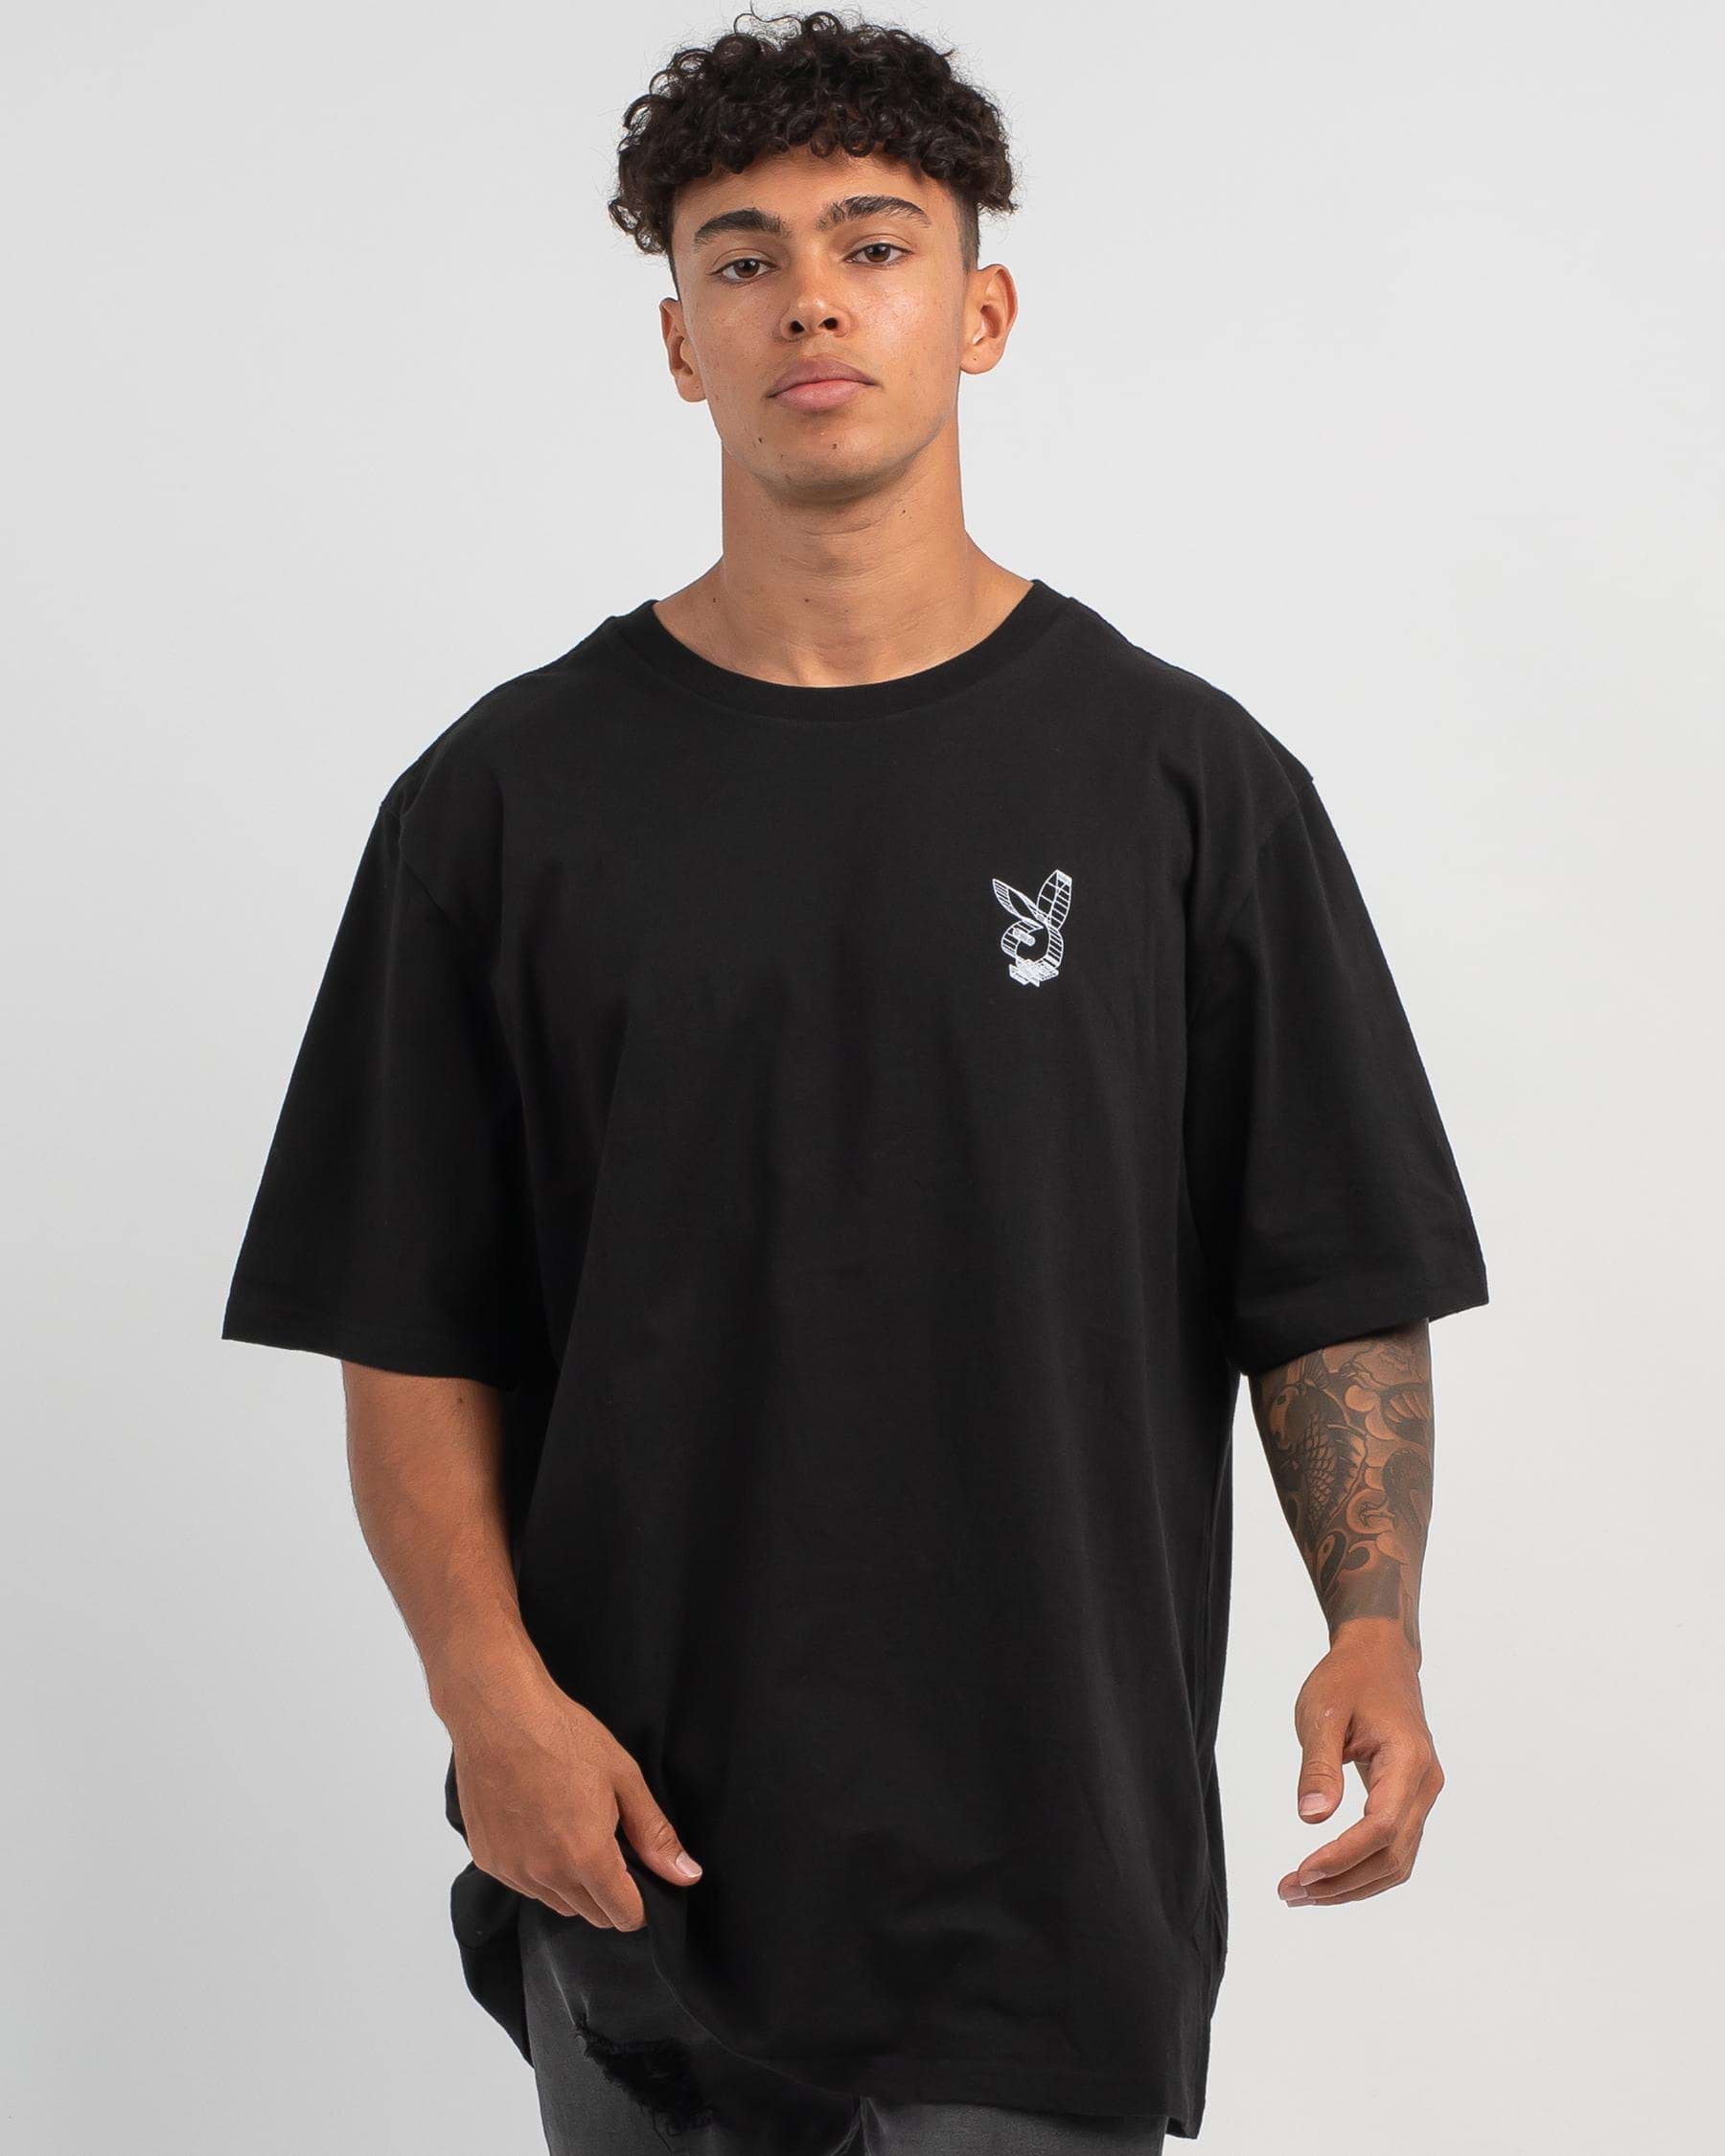 Playboy 3D Stacked T-Shirt In Black - Fast Shipping & Easy Returns ...